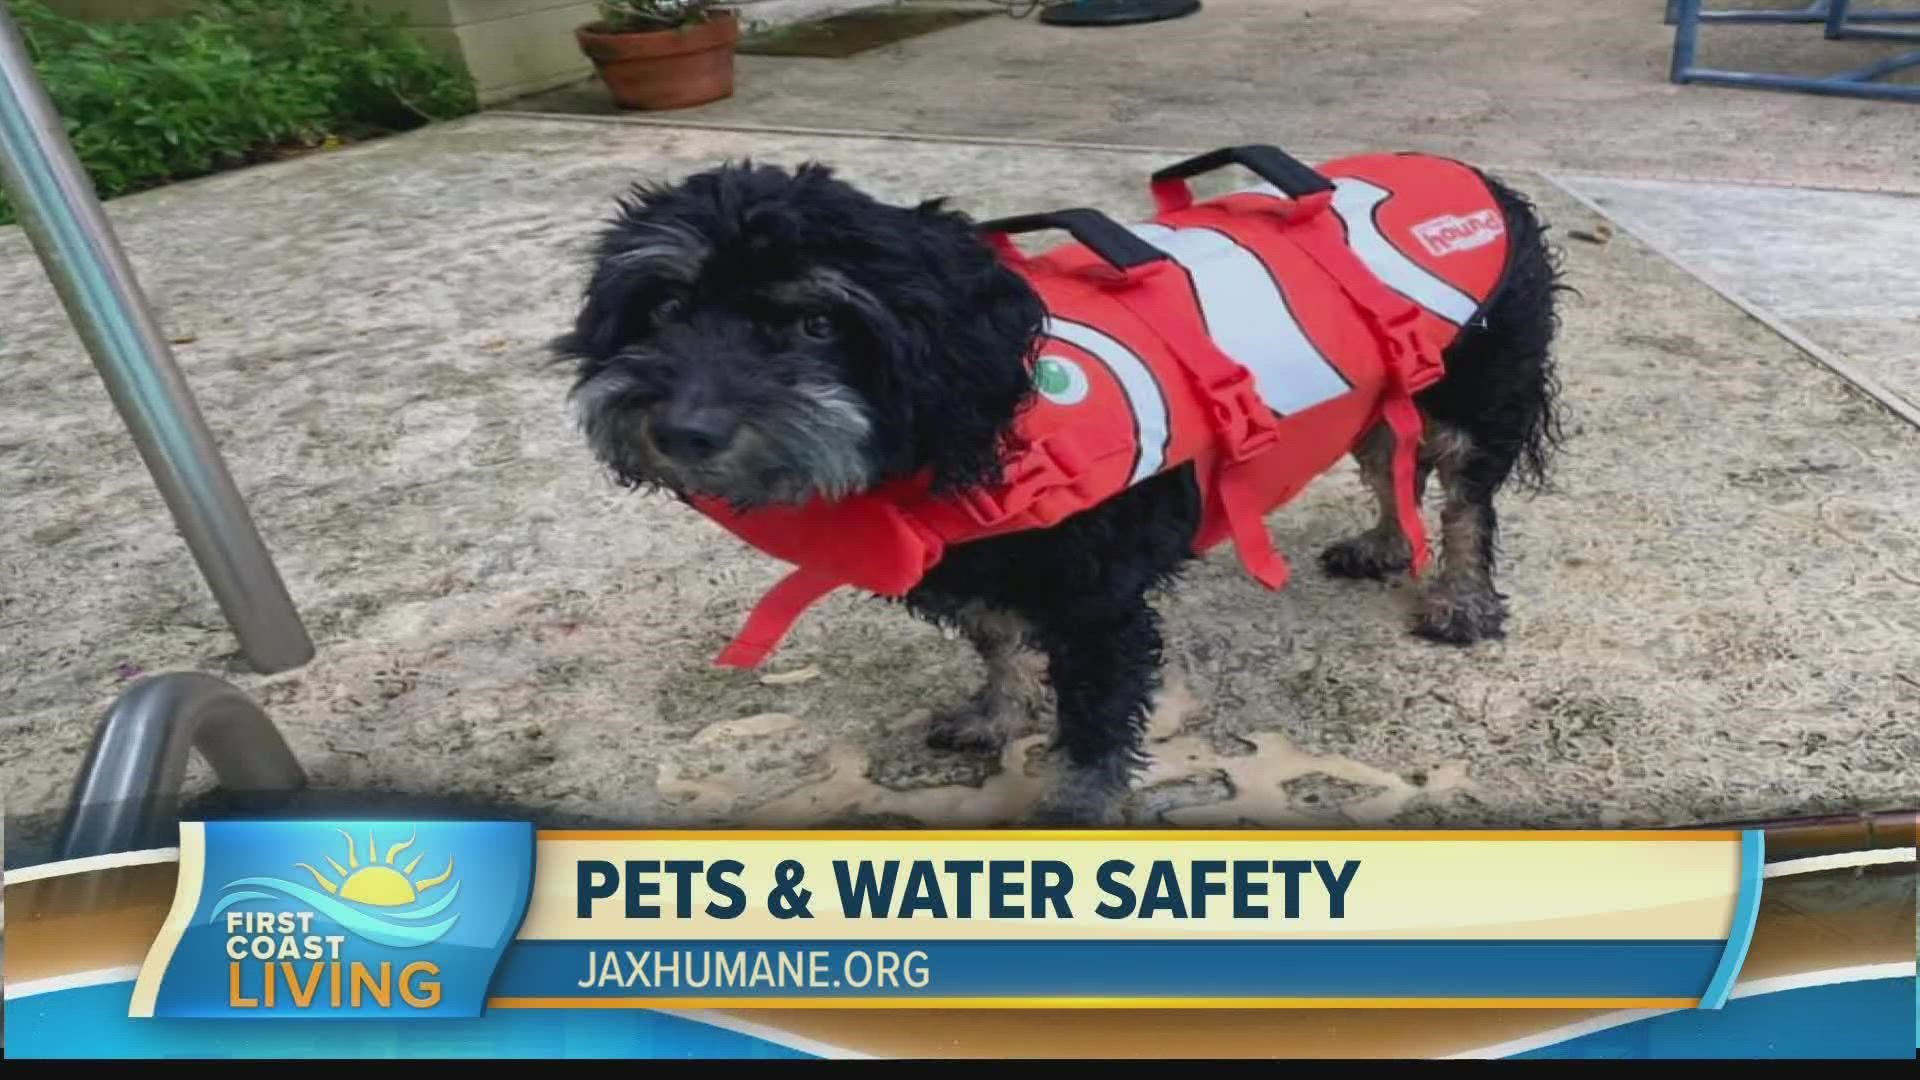 The Jacksonville Humane Director of Community Partnerships, Lindsay Layendecker discusses ways to ensure our pets have a fun and safe day near or on the water.